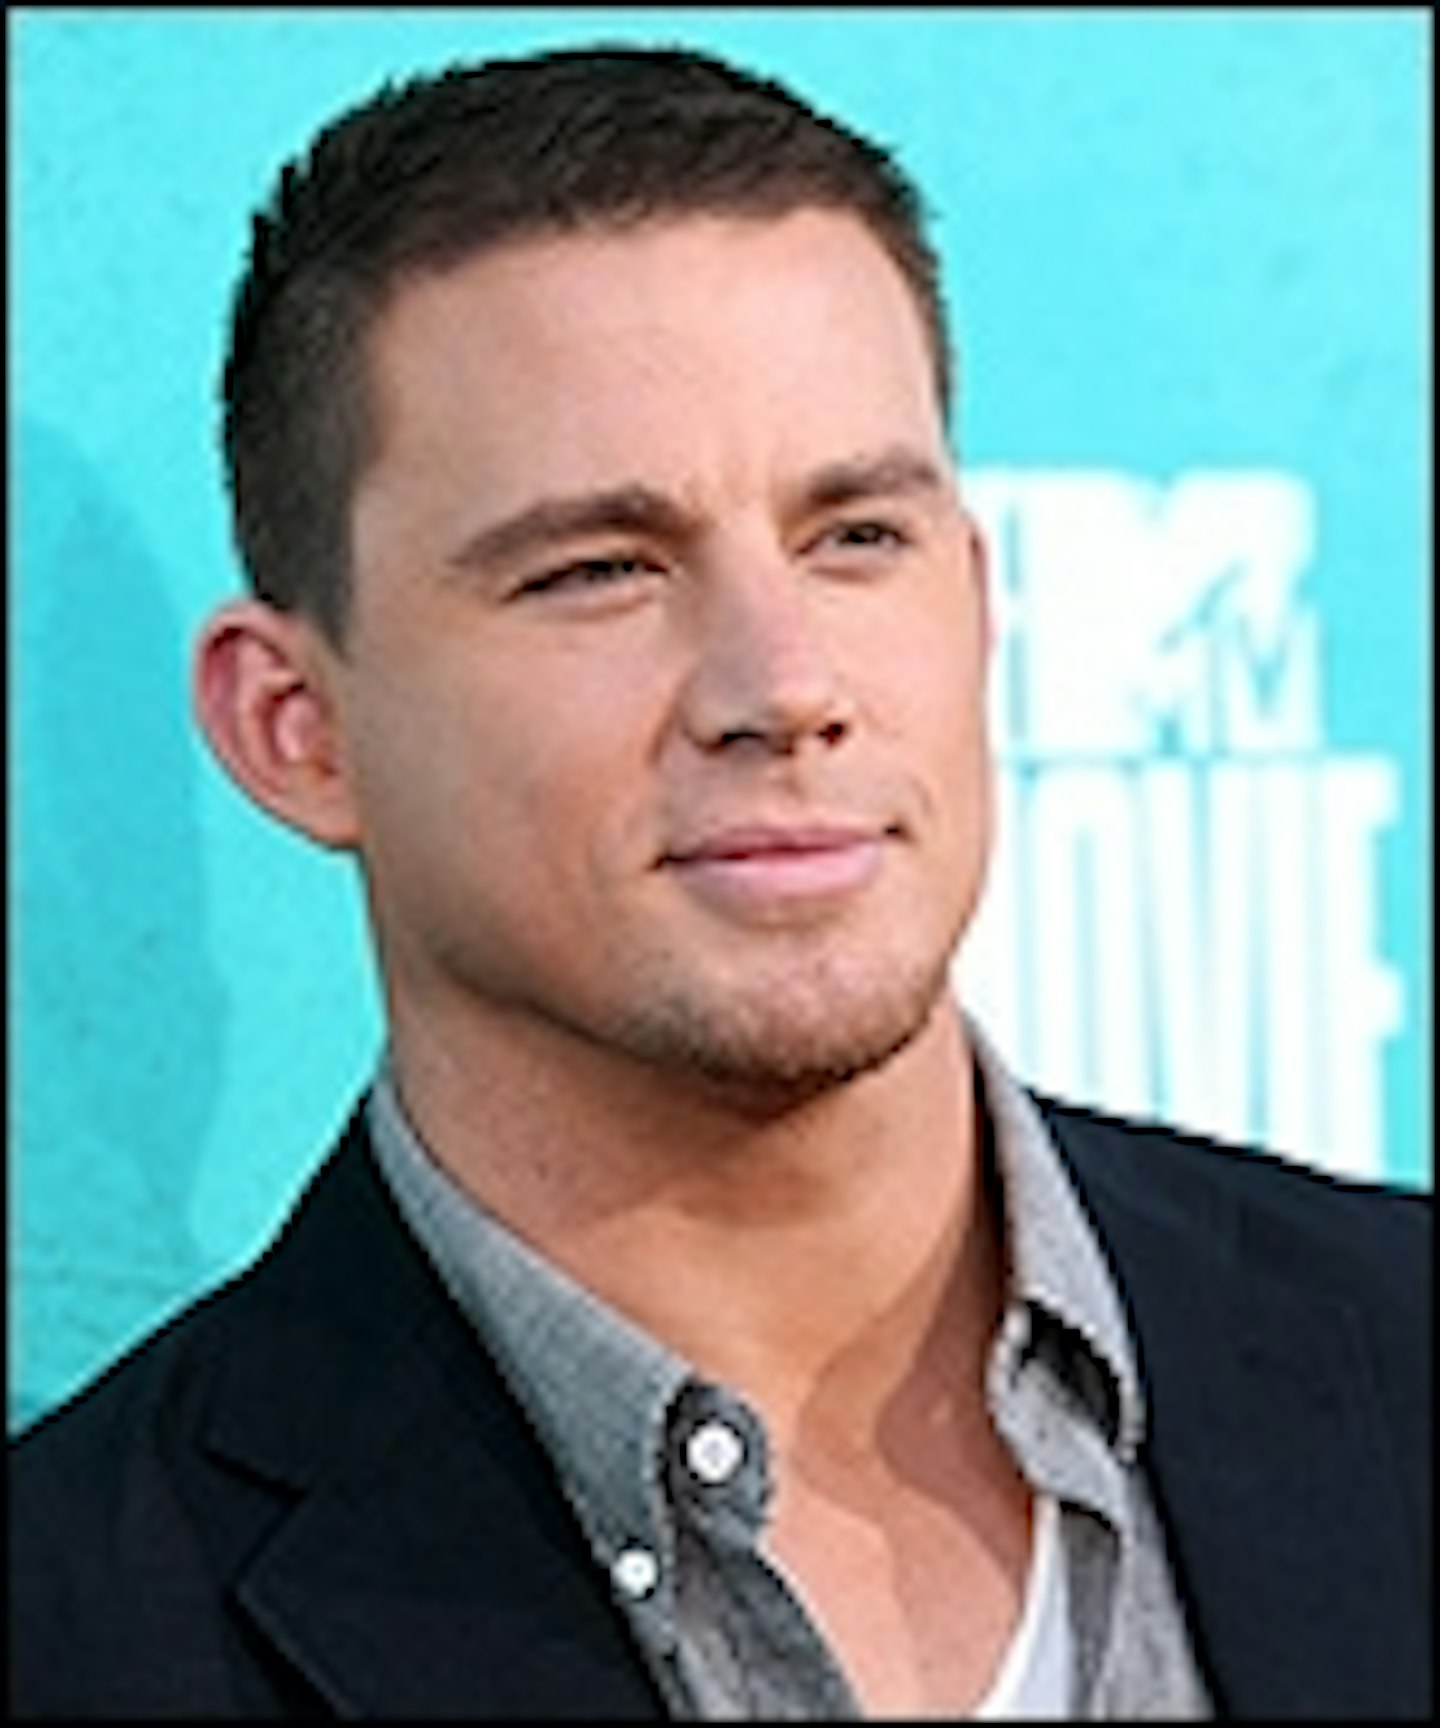 Sony Wants Channing Tatum To Be Struck By Genius